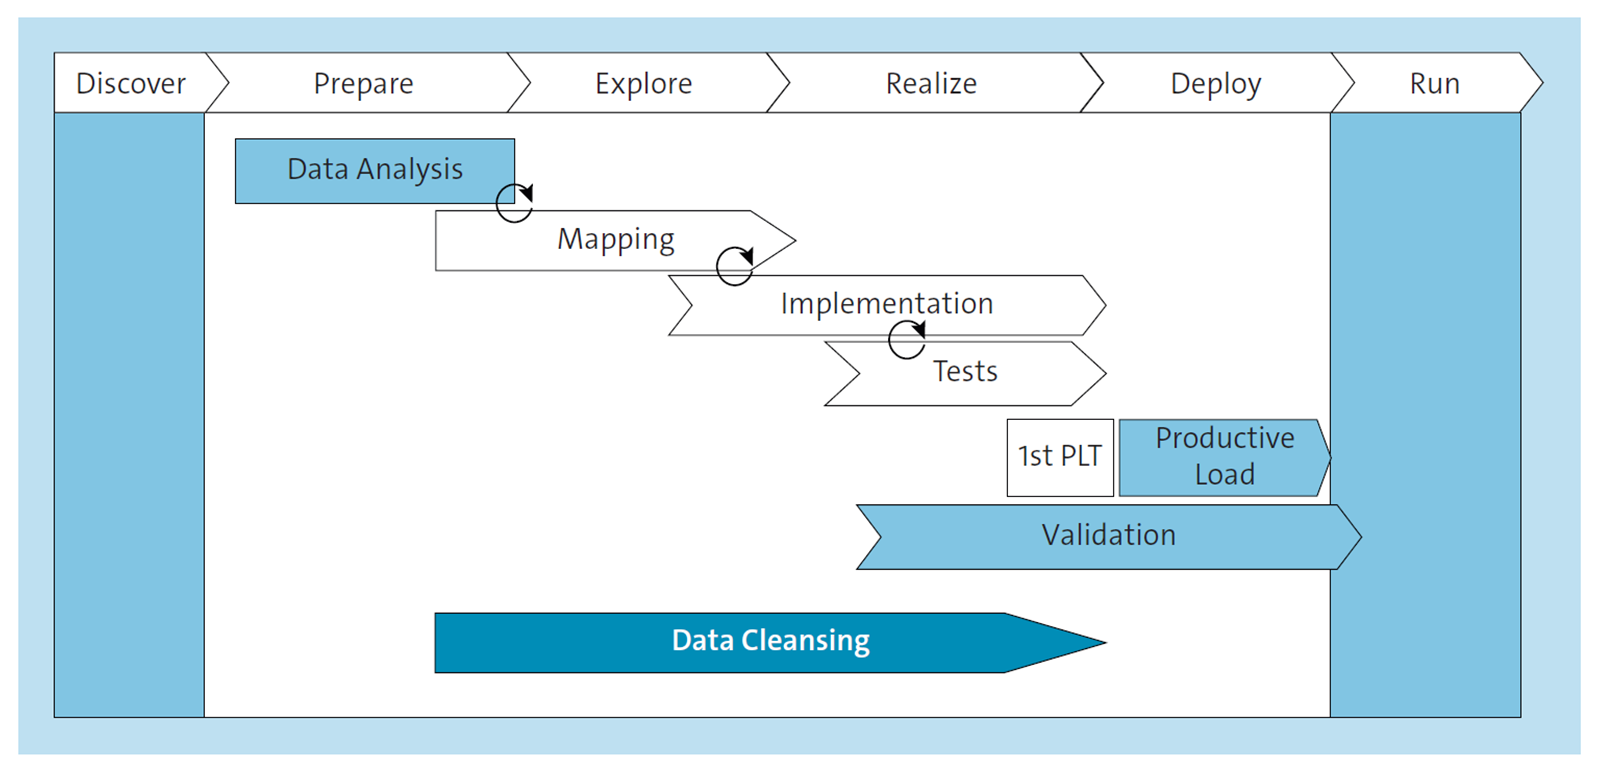 Data Migration Phases in SAP Activate